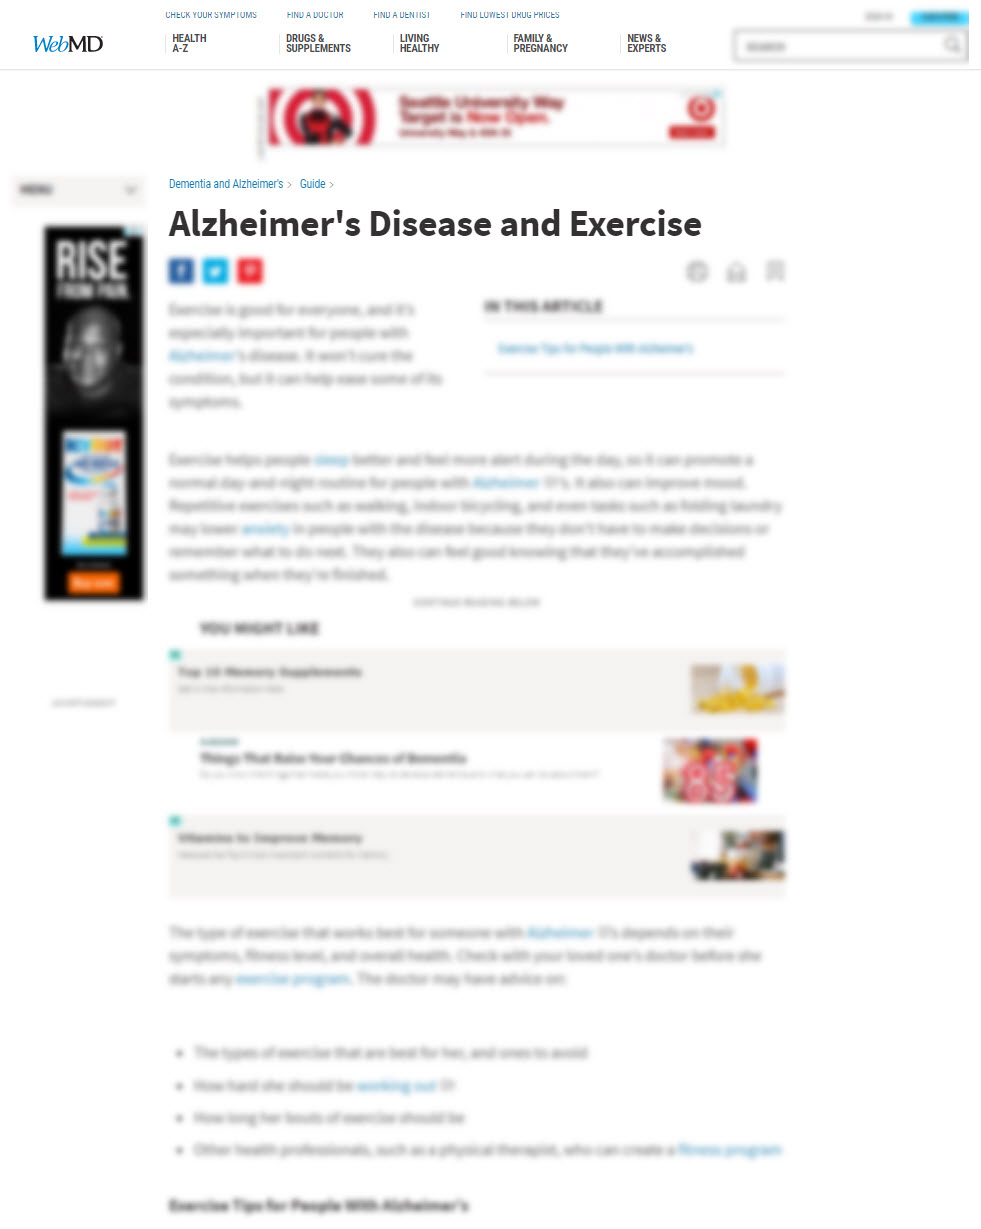 Alzheimer's Disease and Exercise